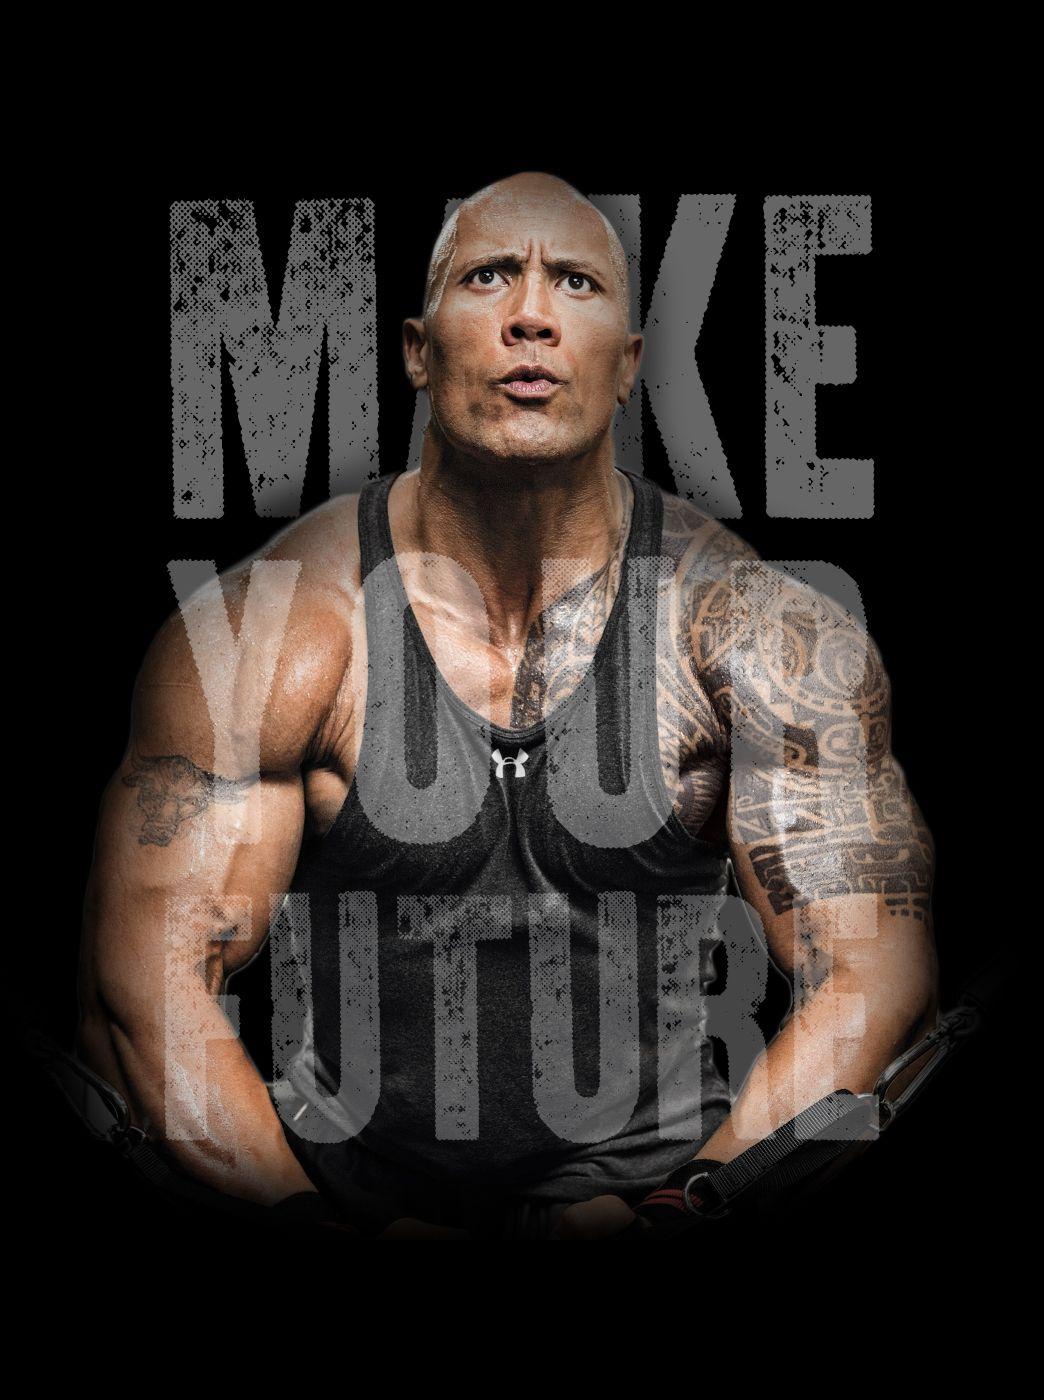 Image I made this Dwayne Johnson wallpaper to motivate me